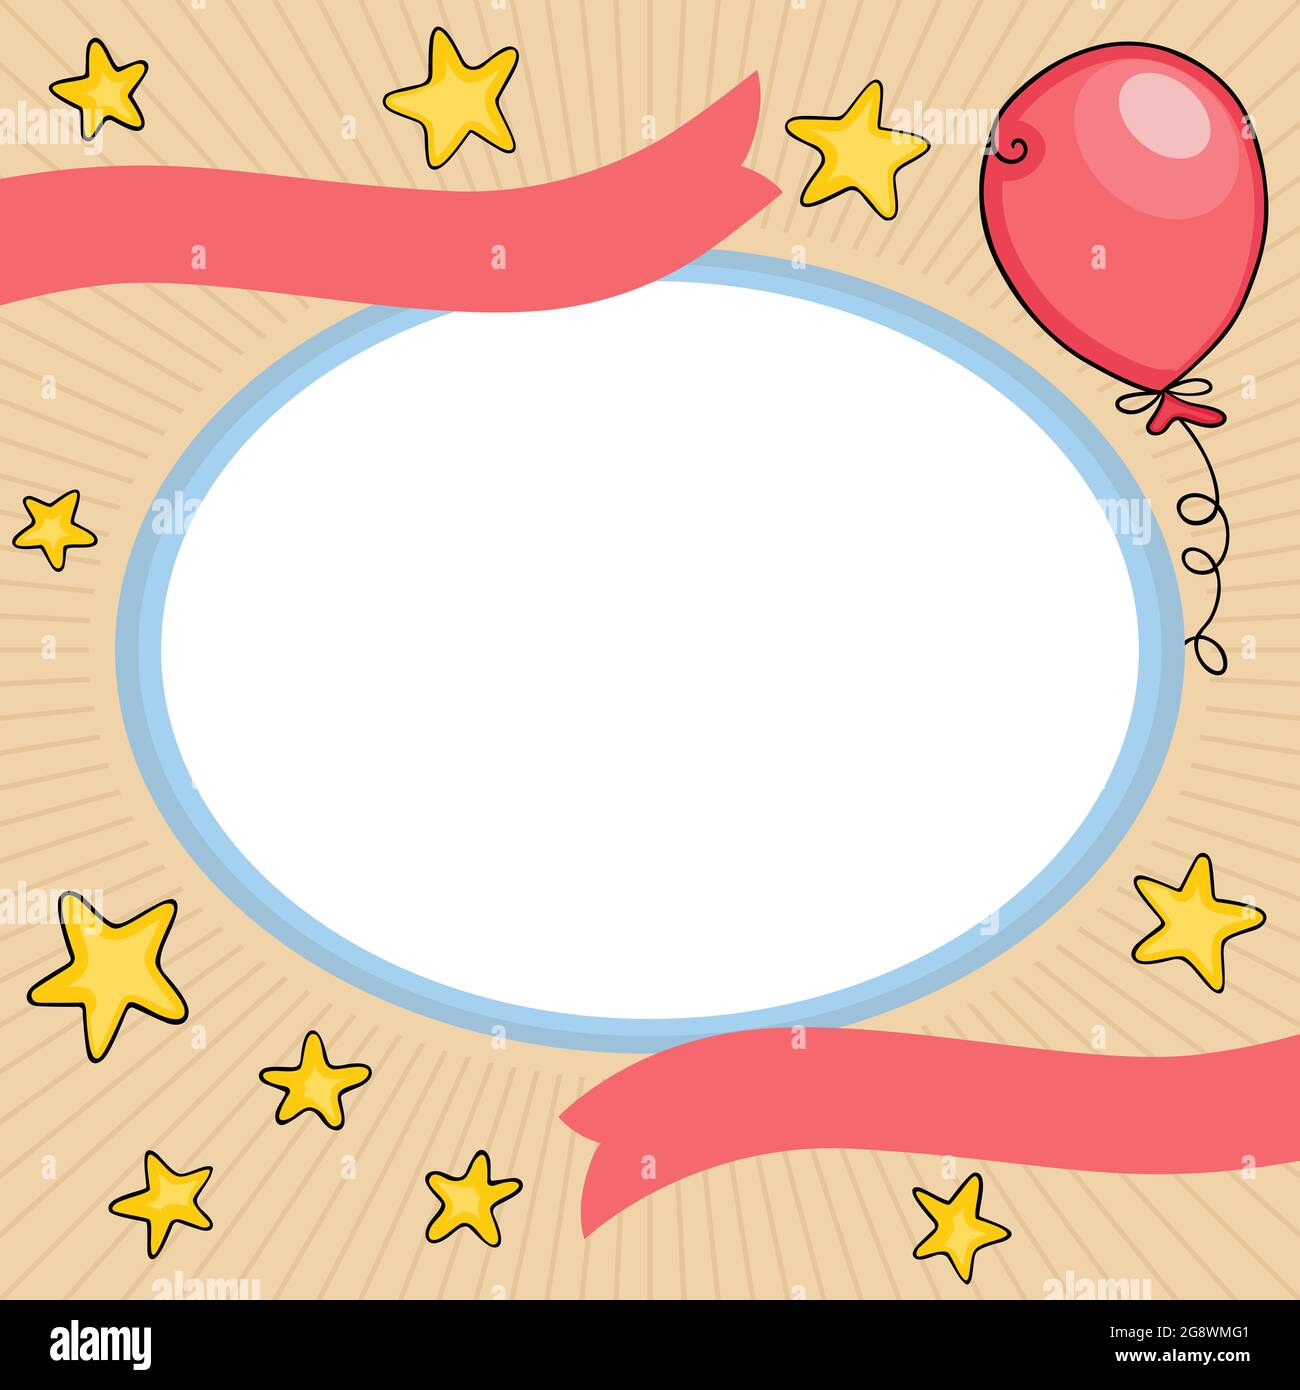 Happy Birthday card background with blank circle frame Stock Photo - Alamy